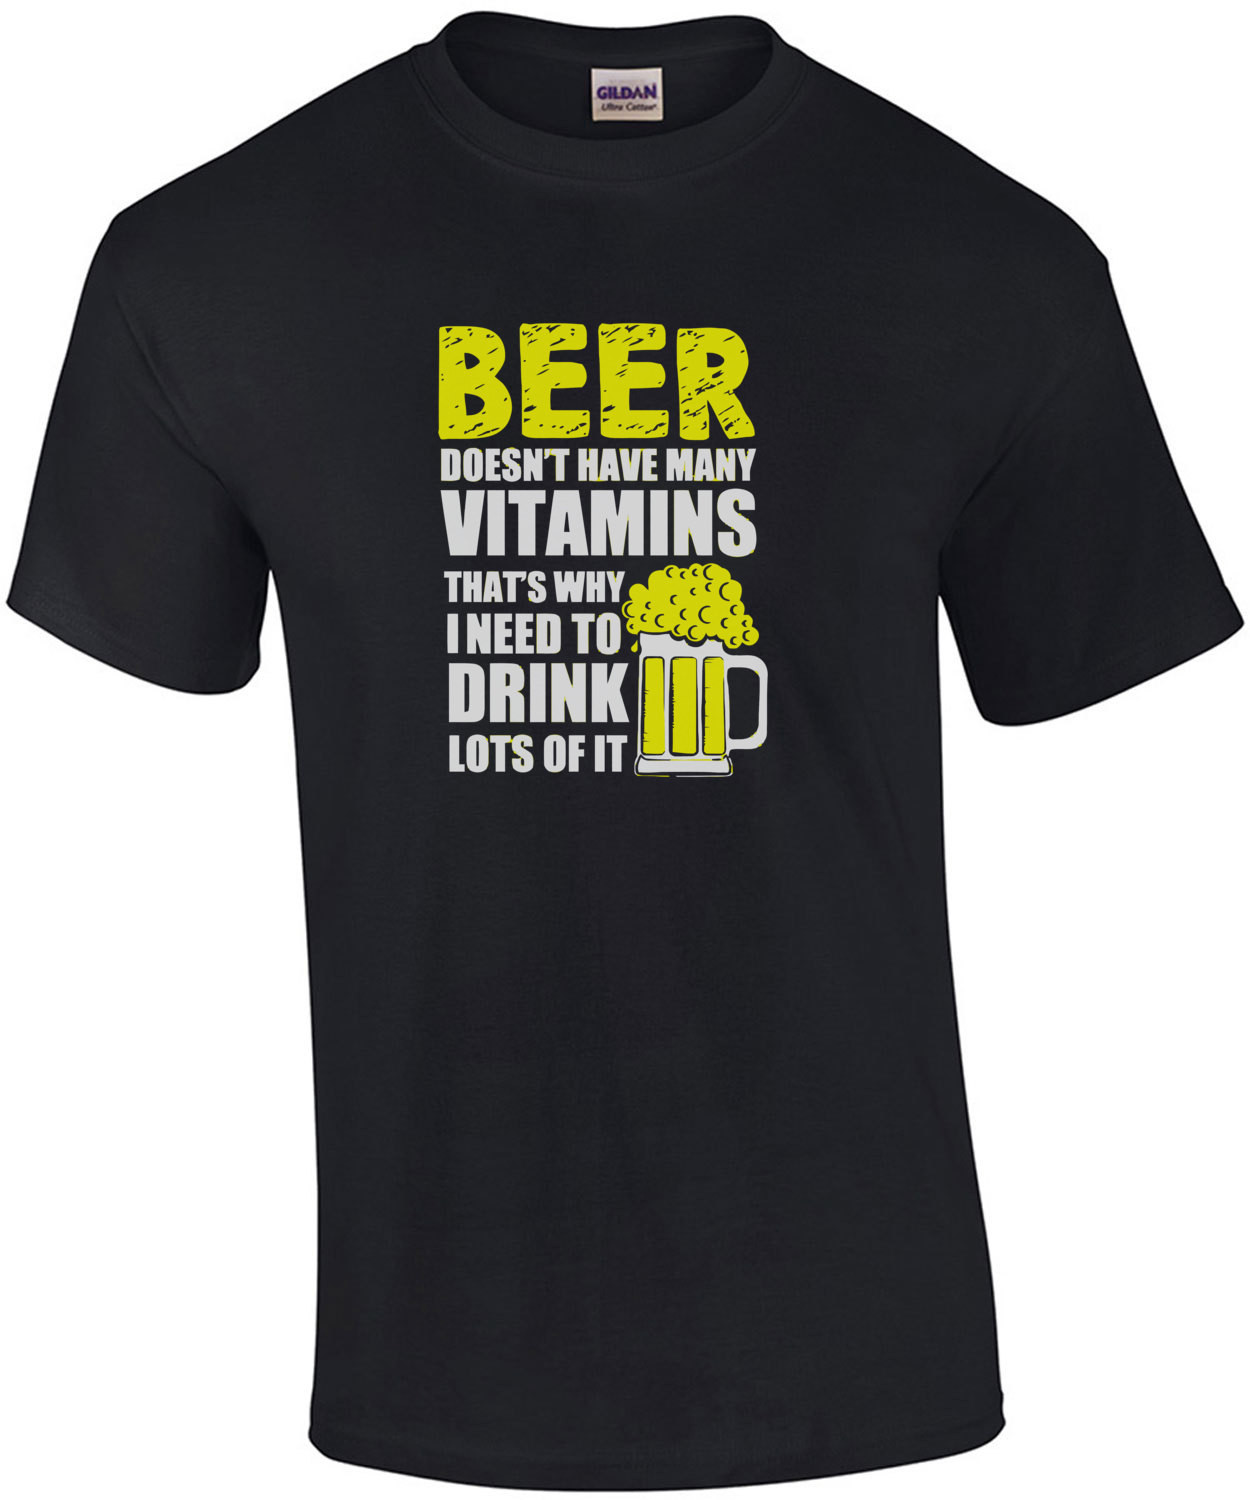 Beer Doesnt Have Many Vitamins Thats Why I Need To Drink Lots Of It T-Shirt